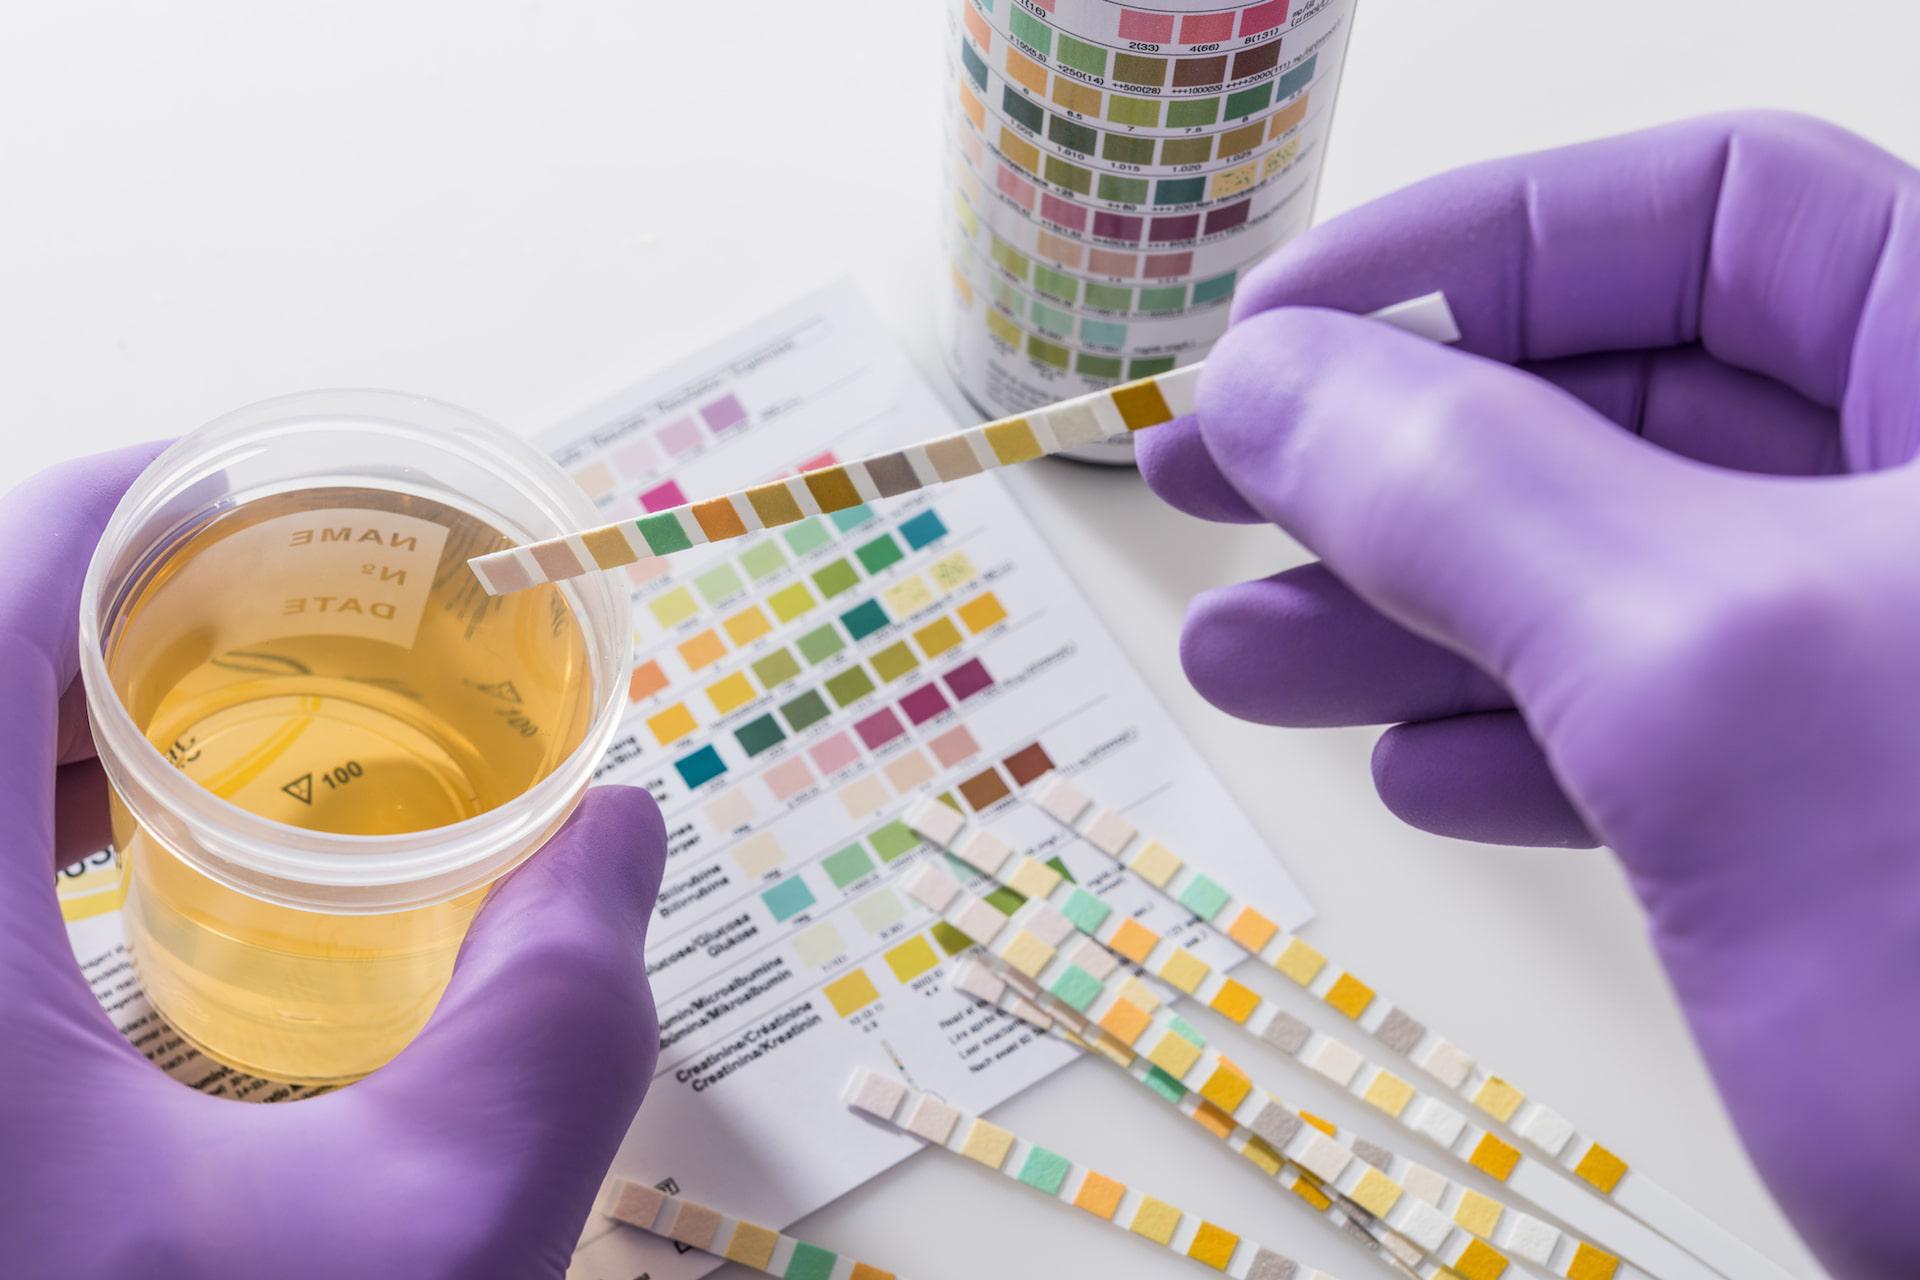 Does Weed Show Up In Urine Tests? - featured